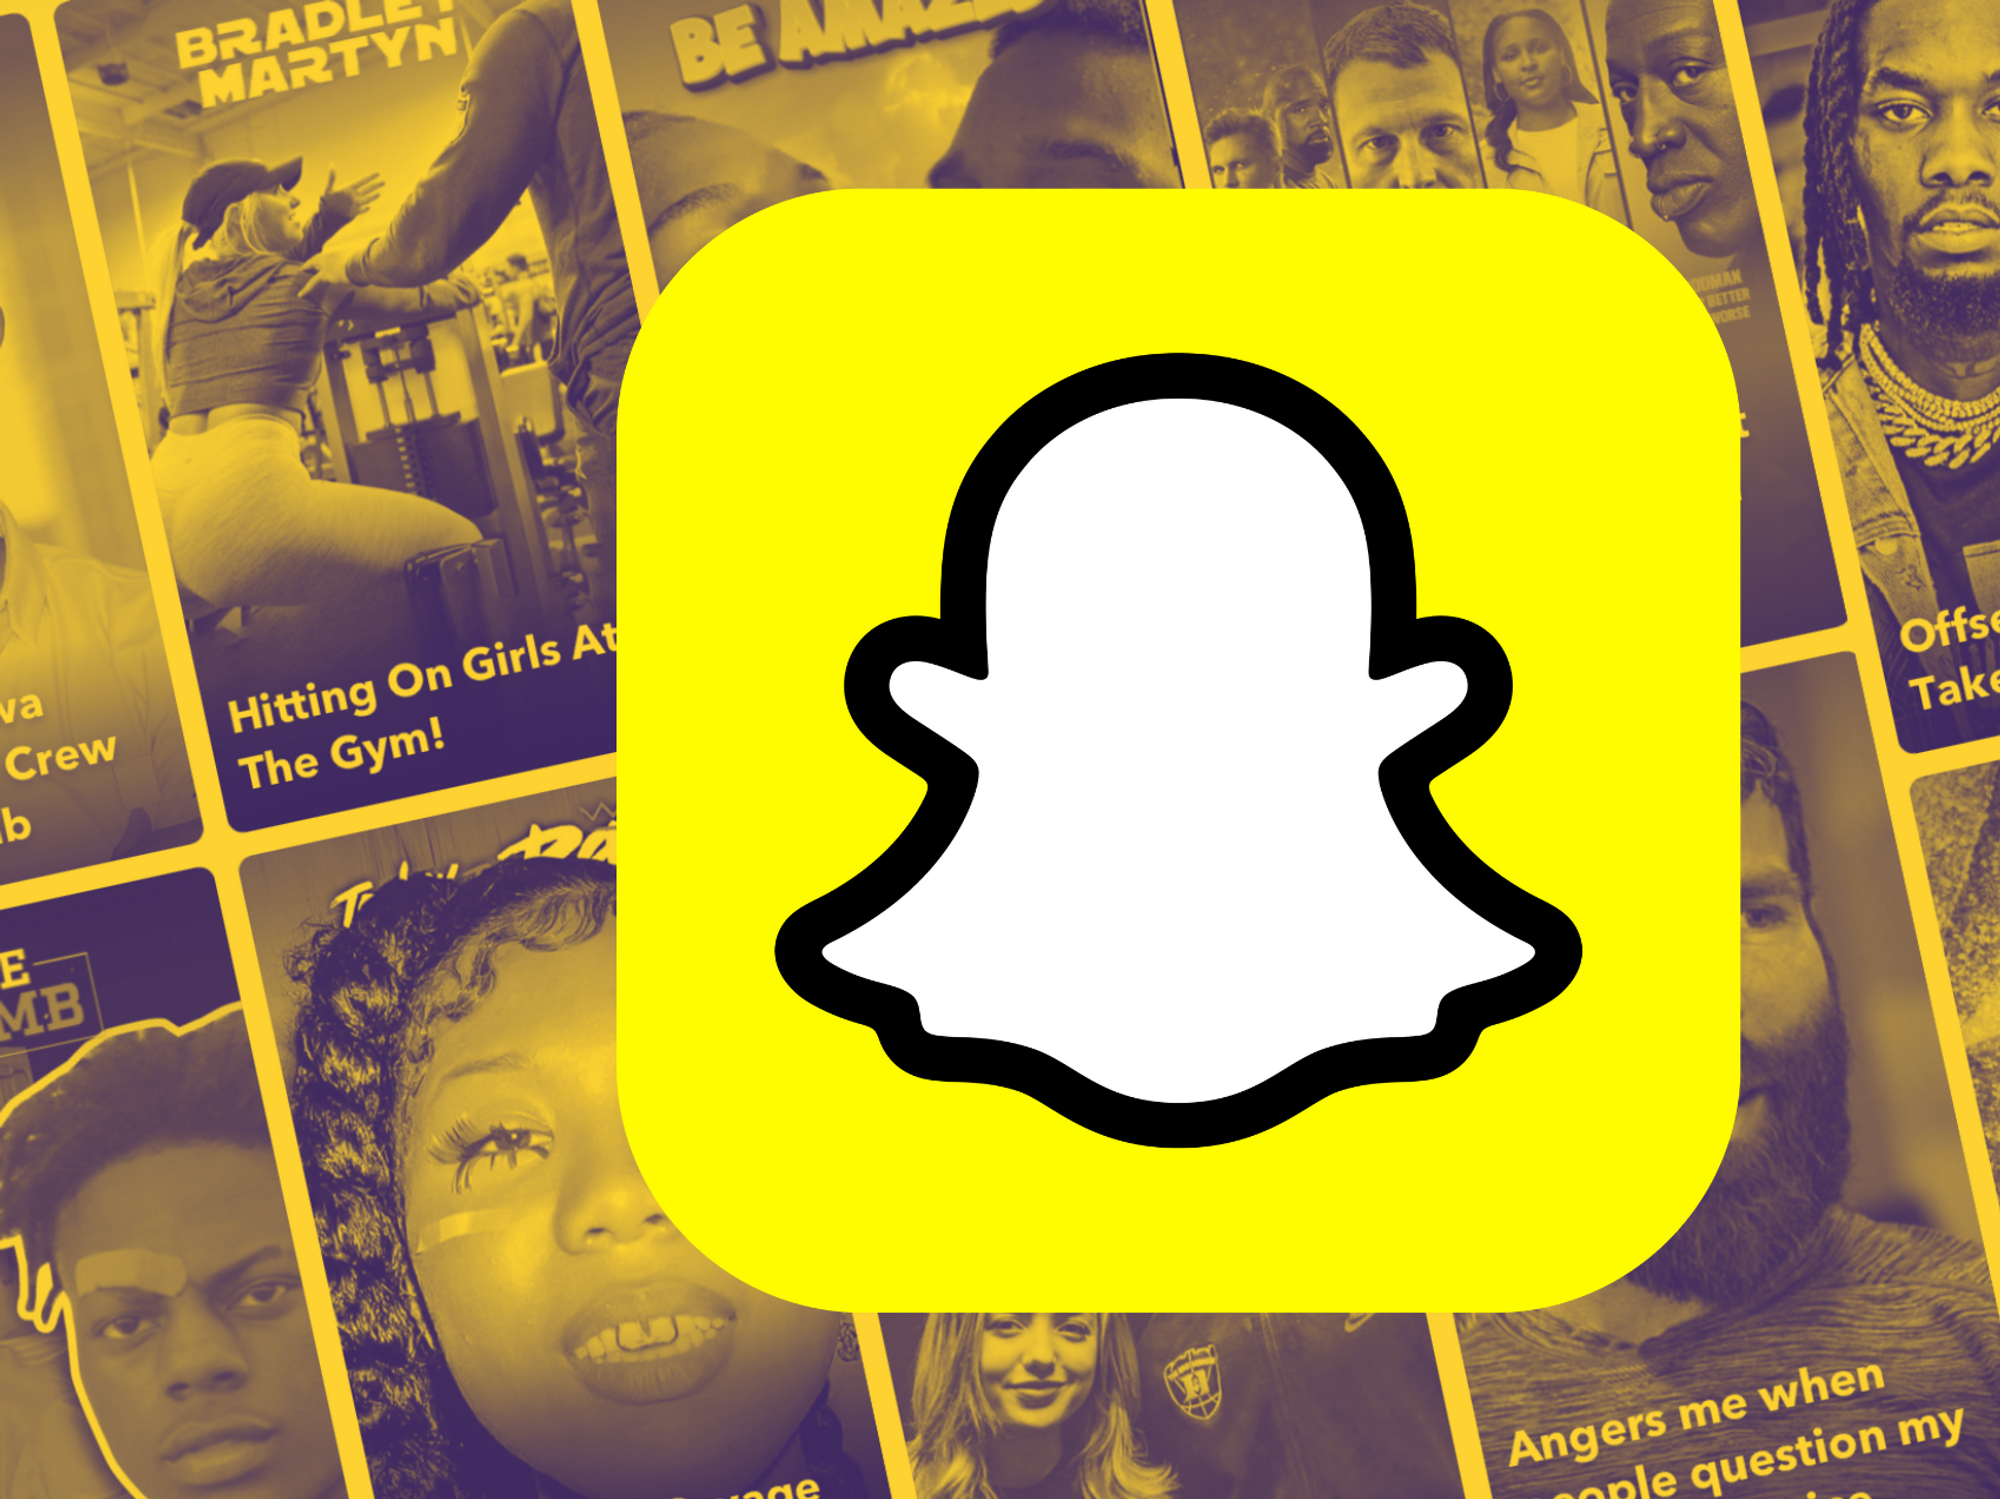 What User Data Does Snapchat Collect? - Dot.La